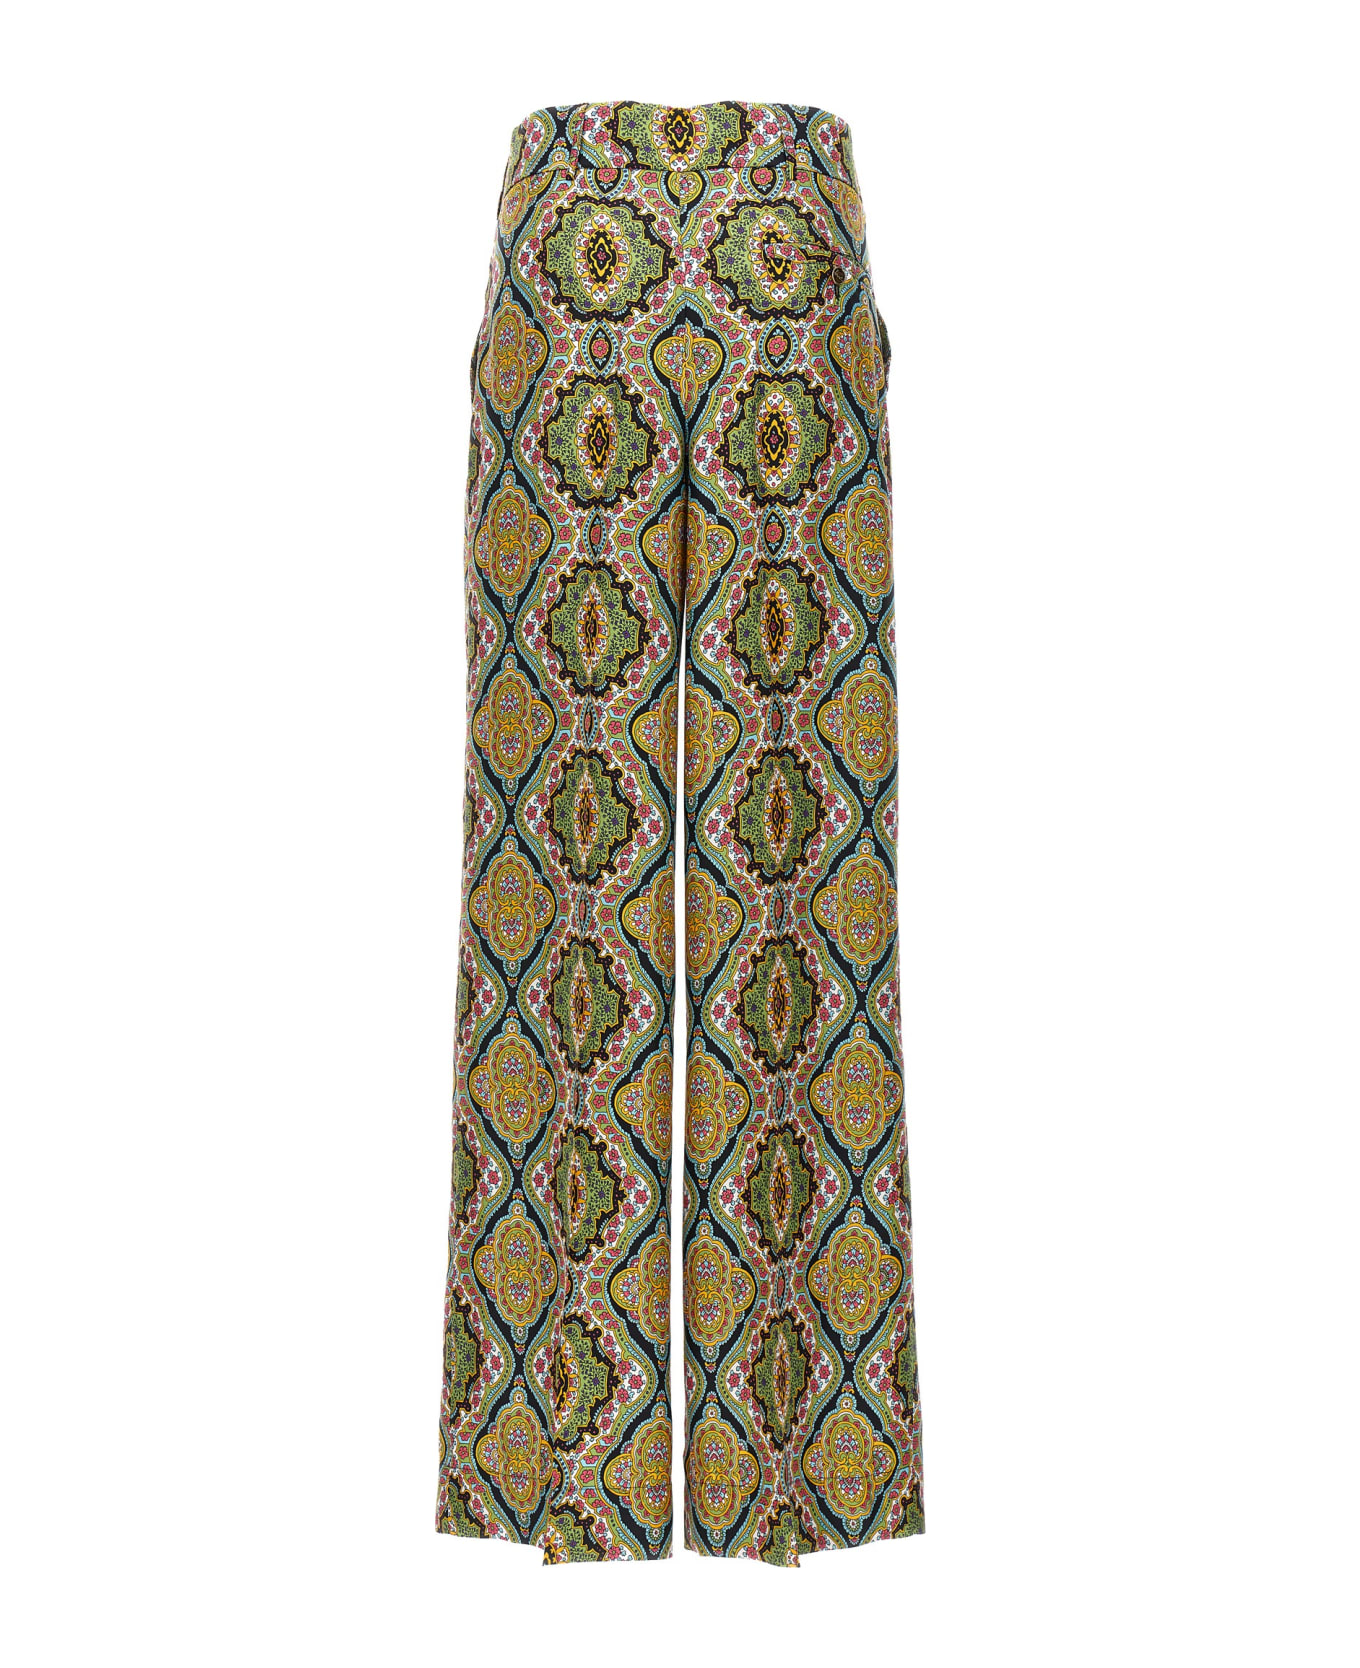 Etro All Over Print Pants - Green